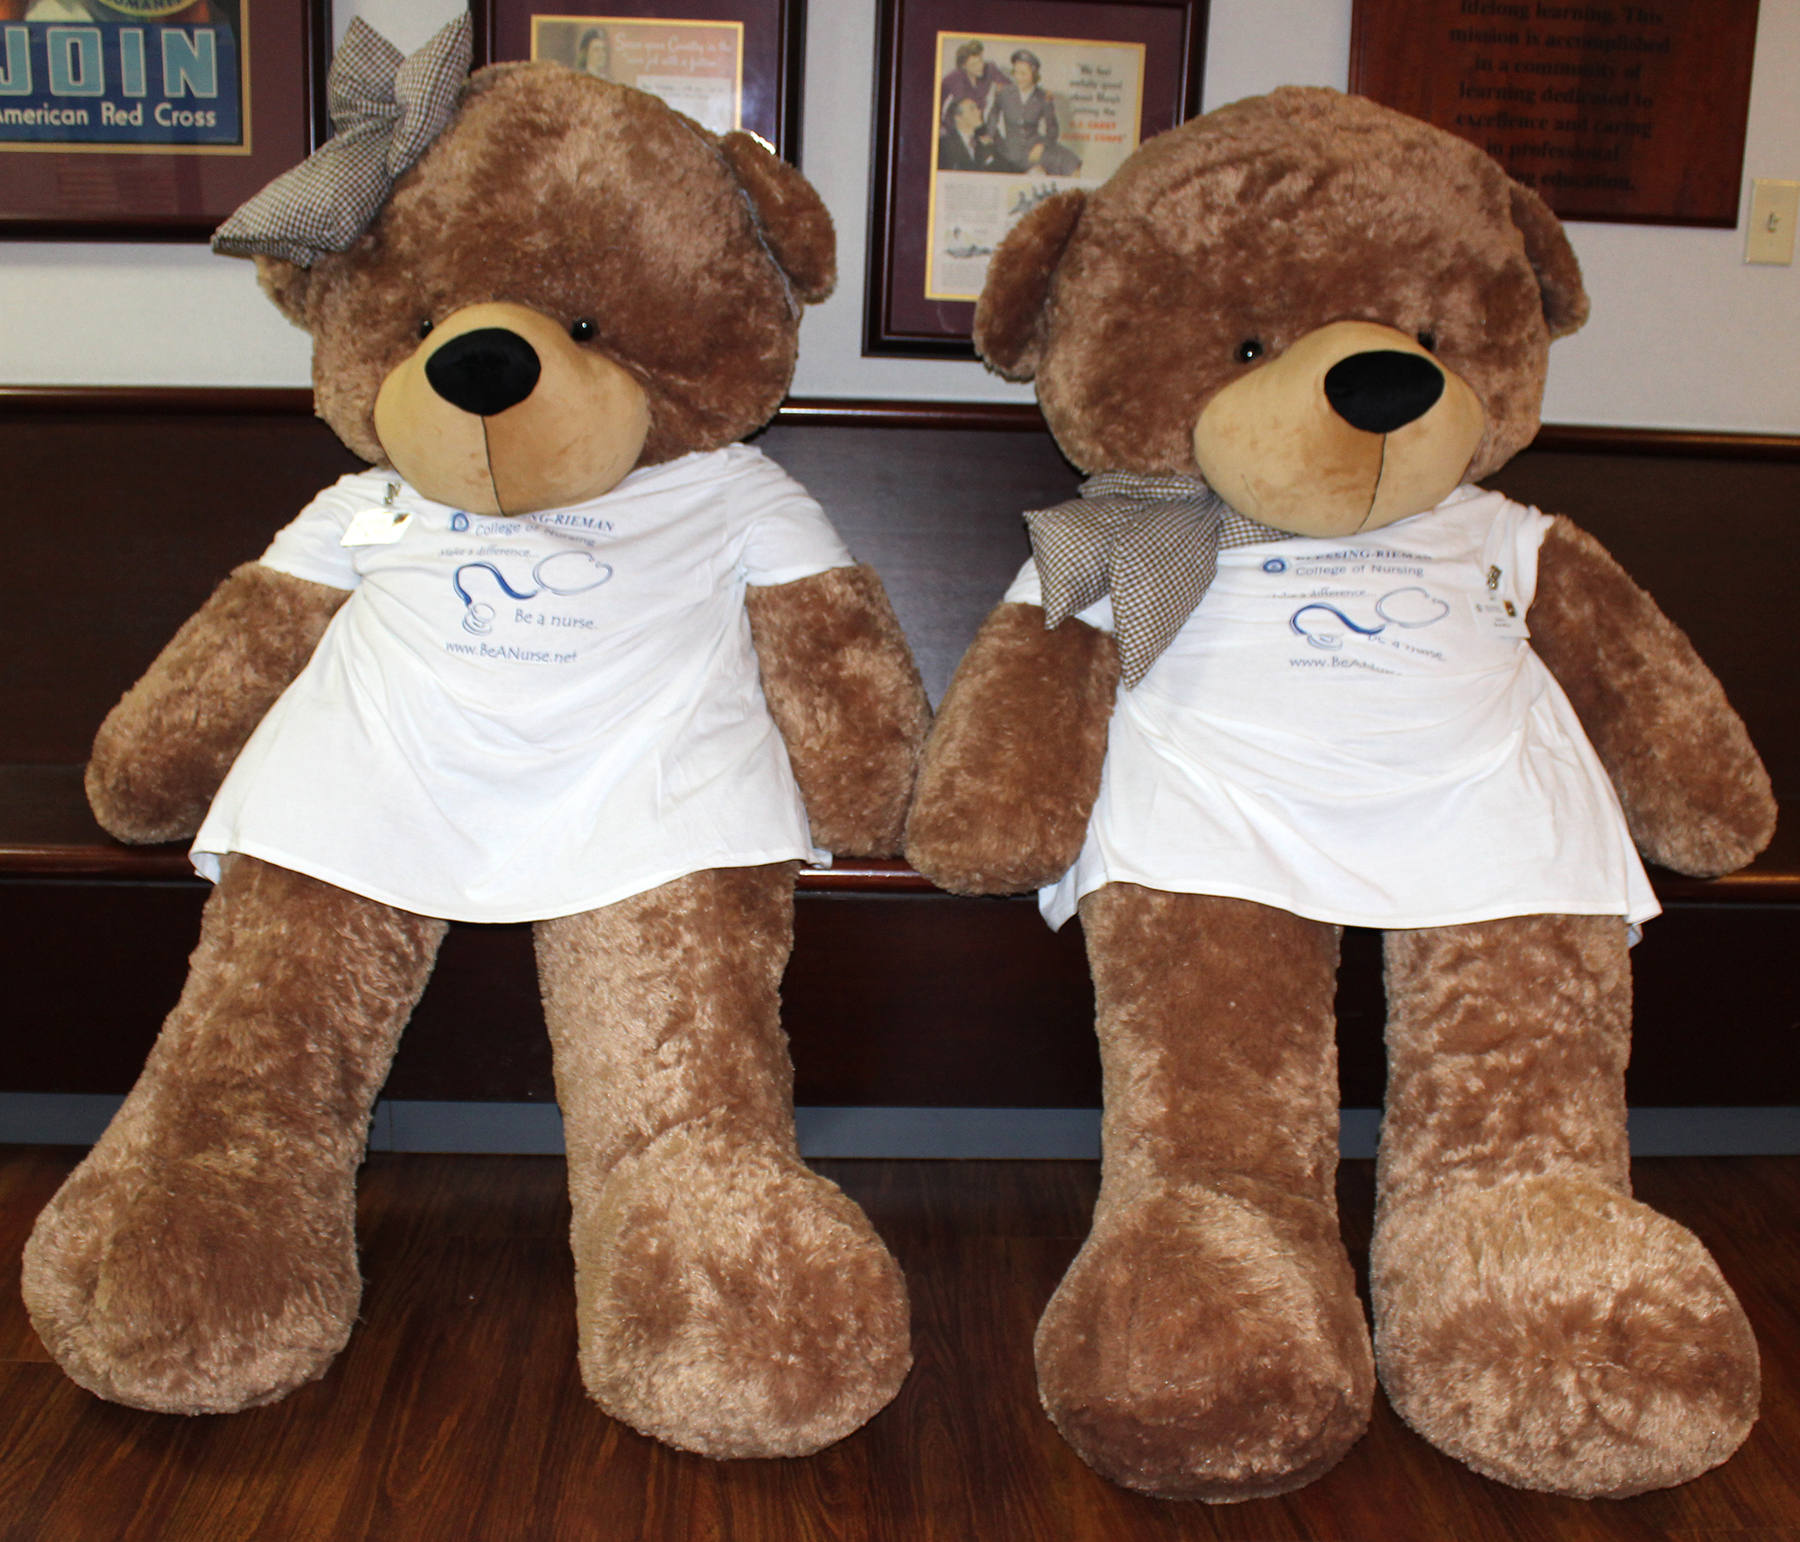 Flo BrownBear on left and Dorsey BrownBear on right